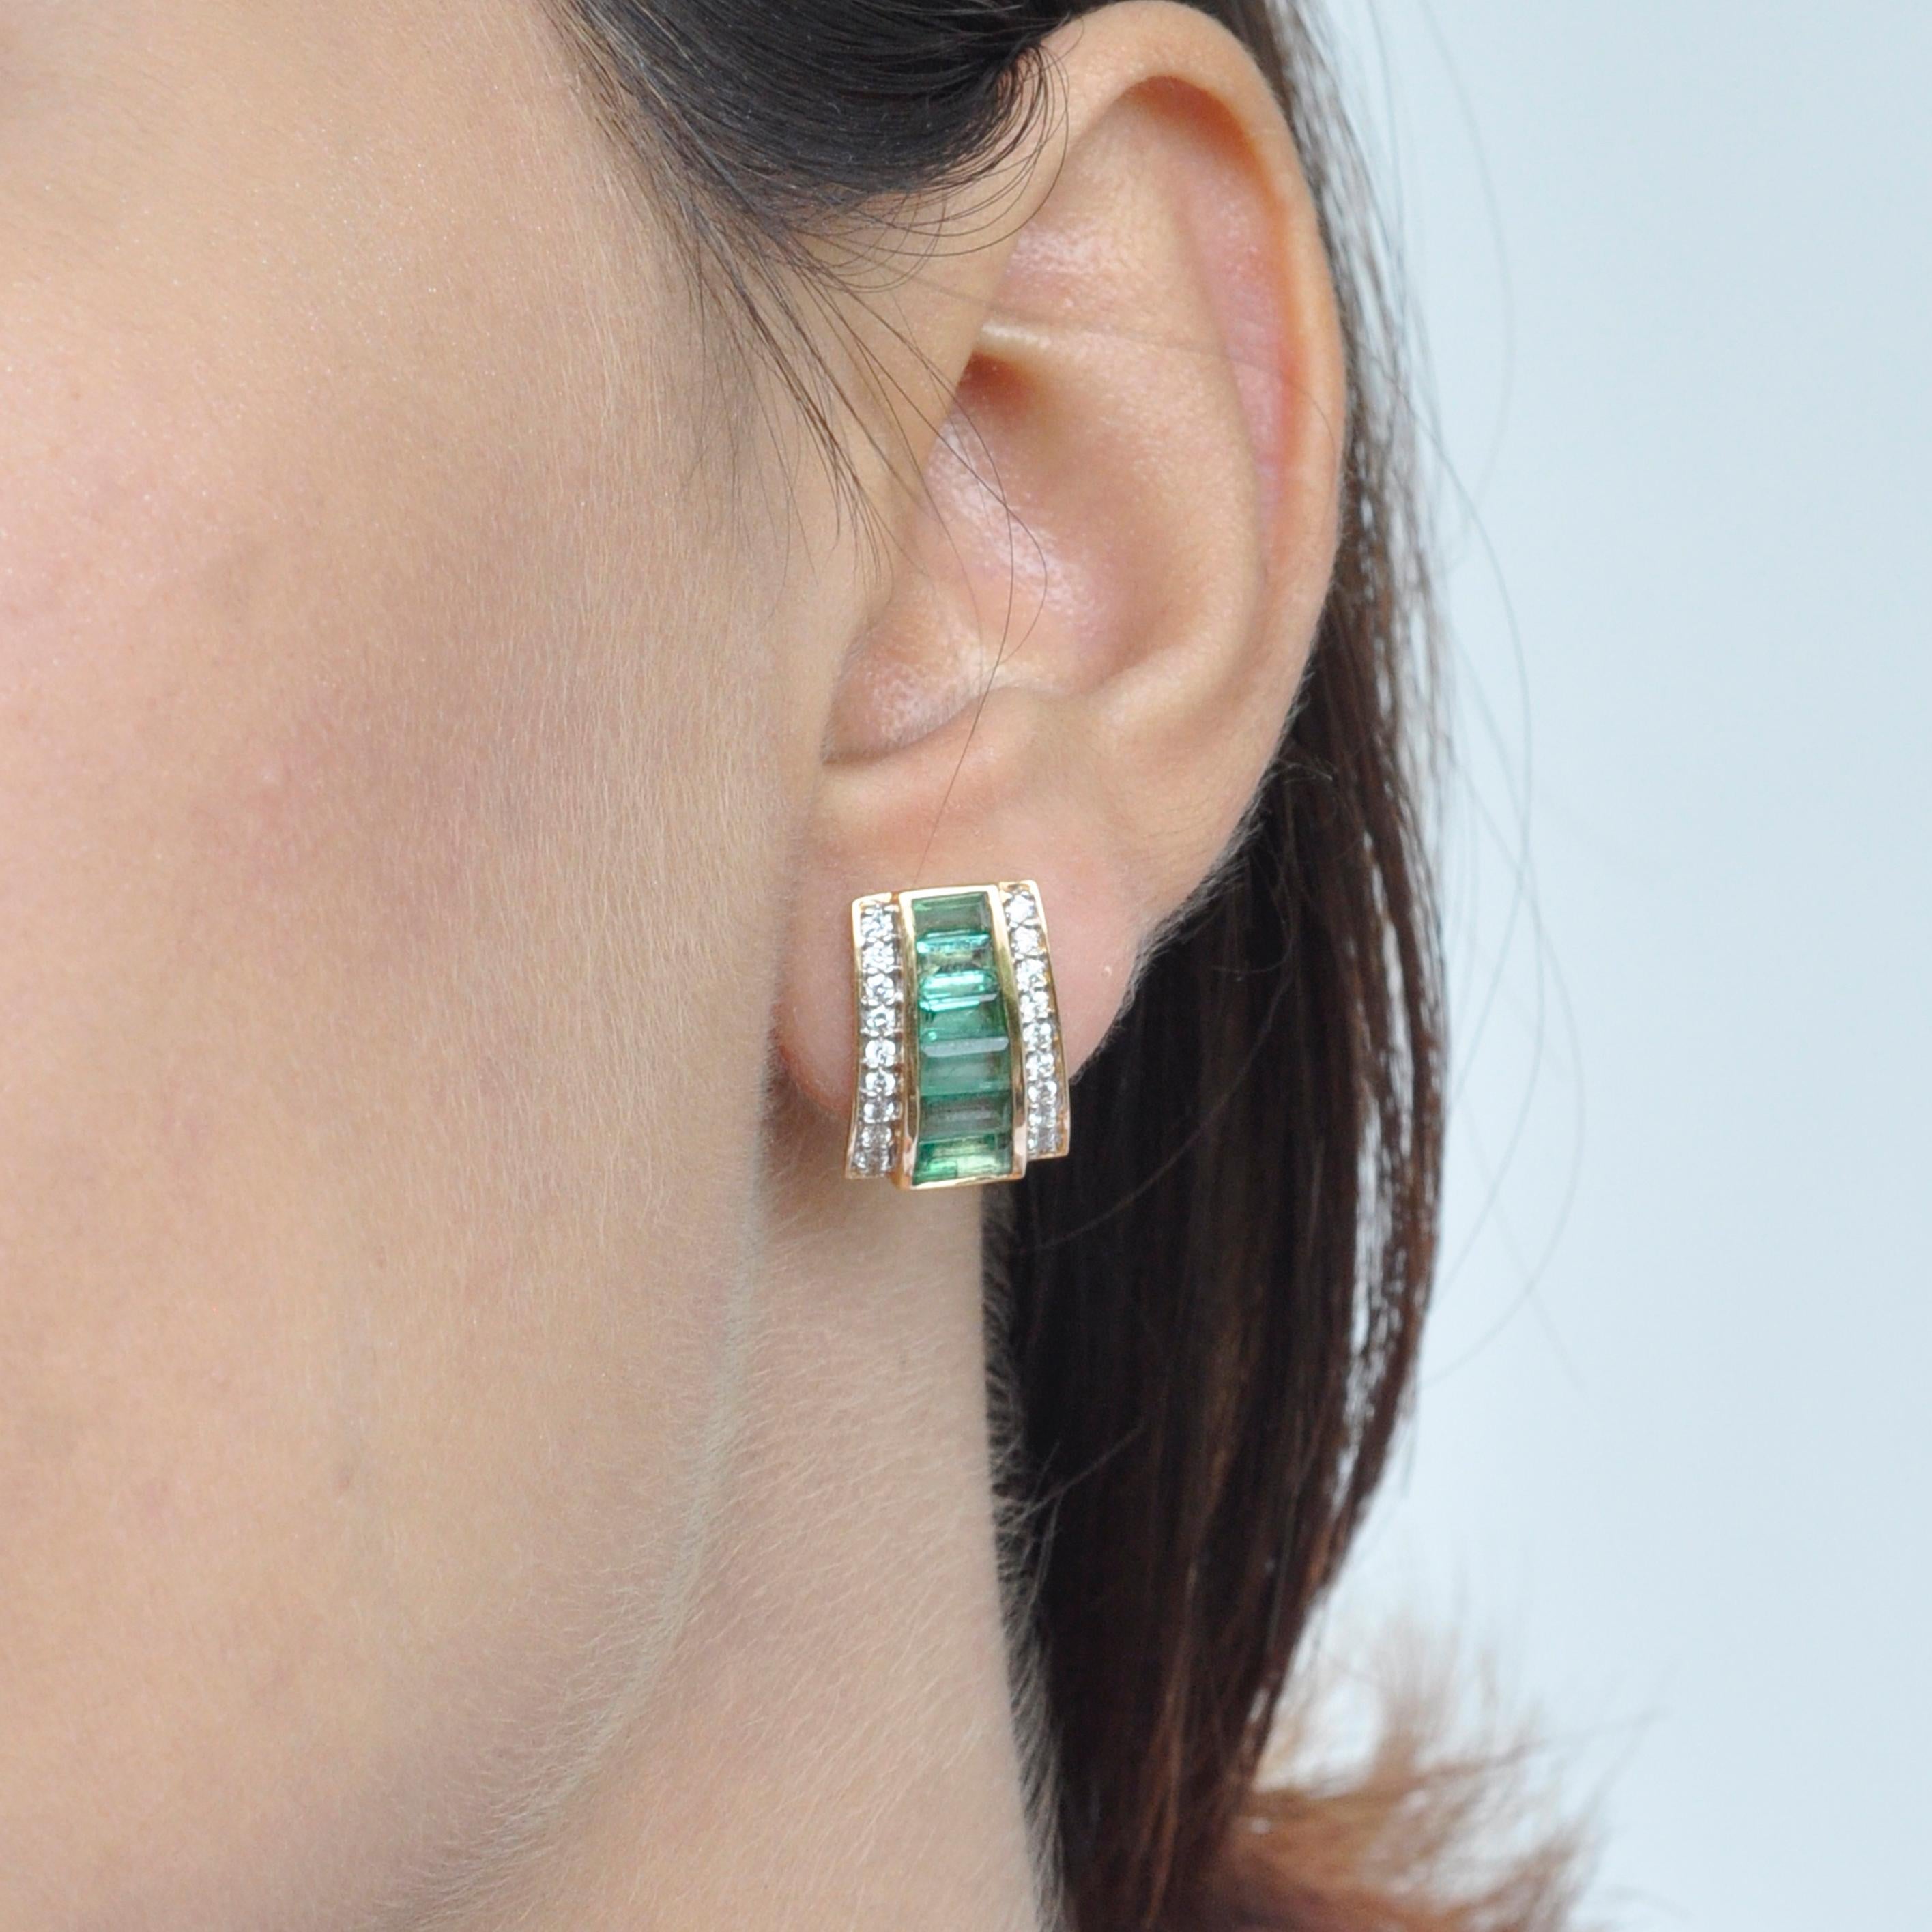 Art ceco, color and culture all come together to inspire this 18 karat gold art deco mint green emerald baguette diamond pyramid shaped stud earrings, where the lush mint green emeralds exudes youthfulness and self-confidence while dictating the